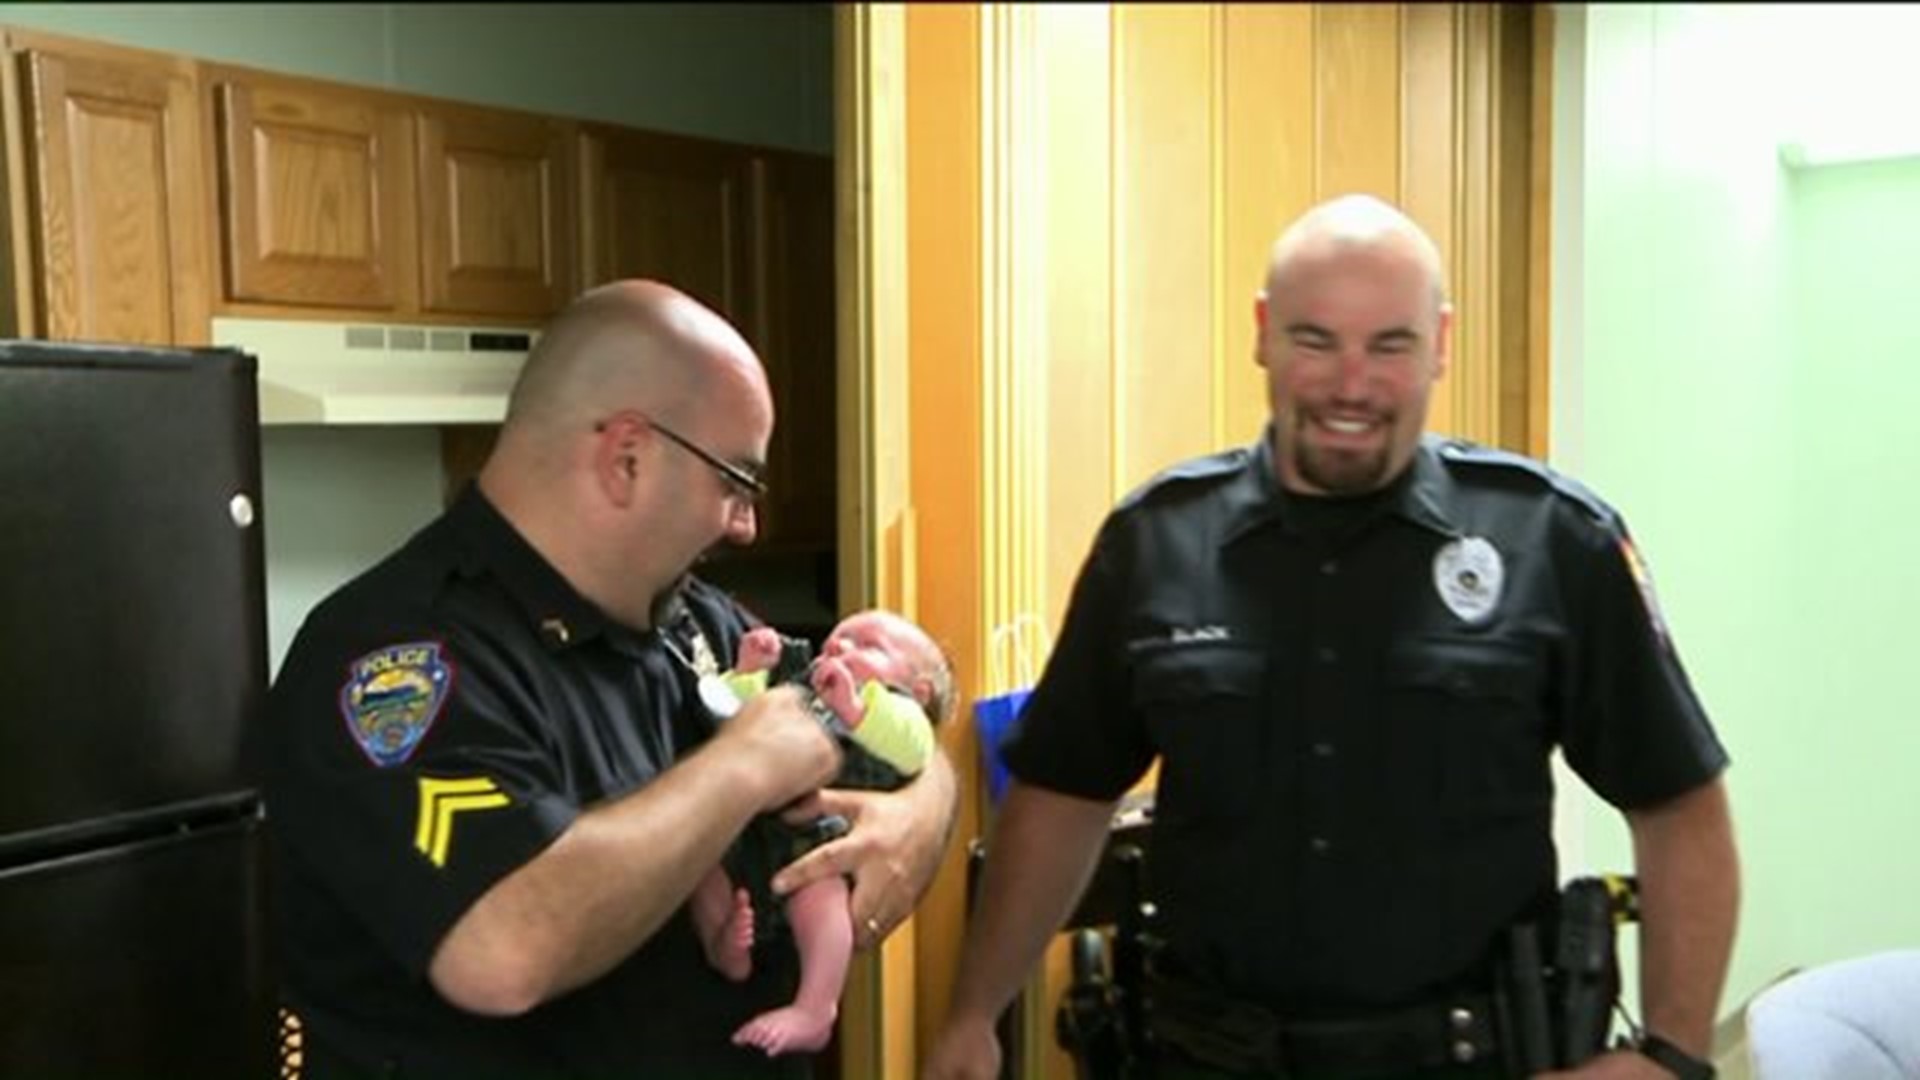 Police Officers Honored for Helping Deliver Baby